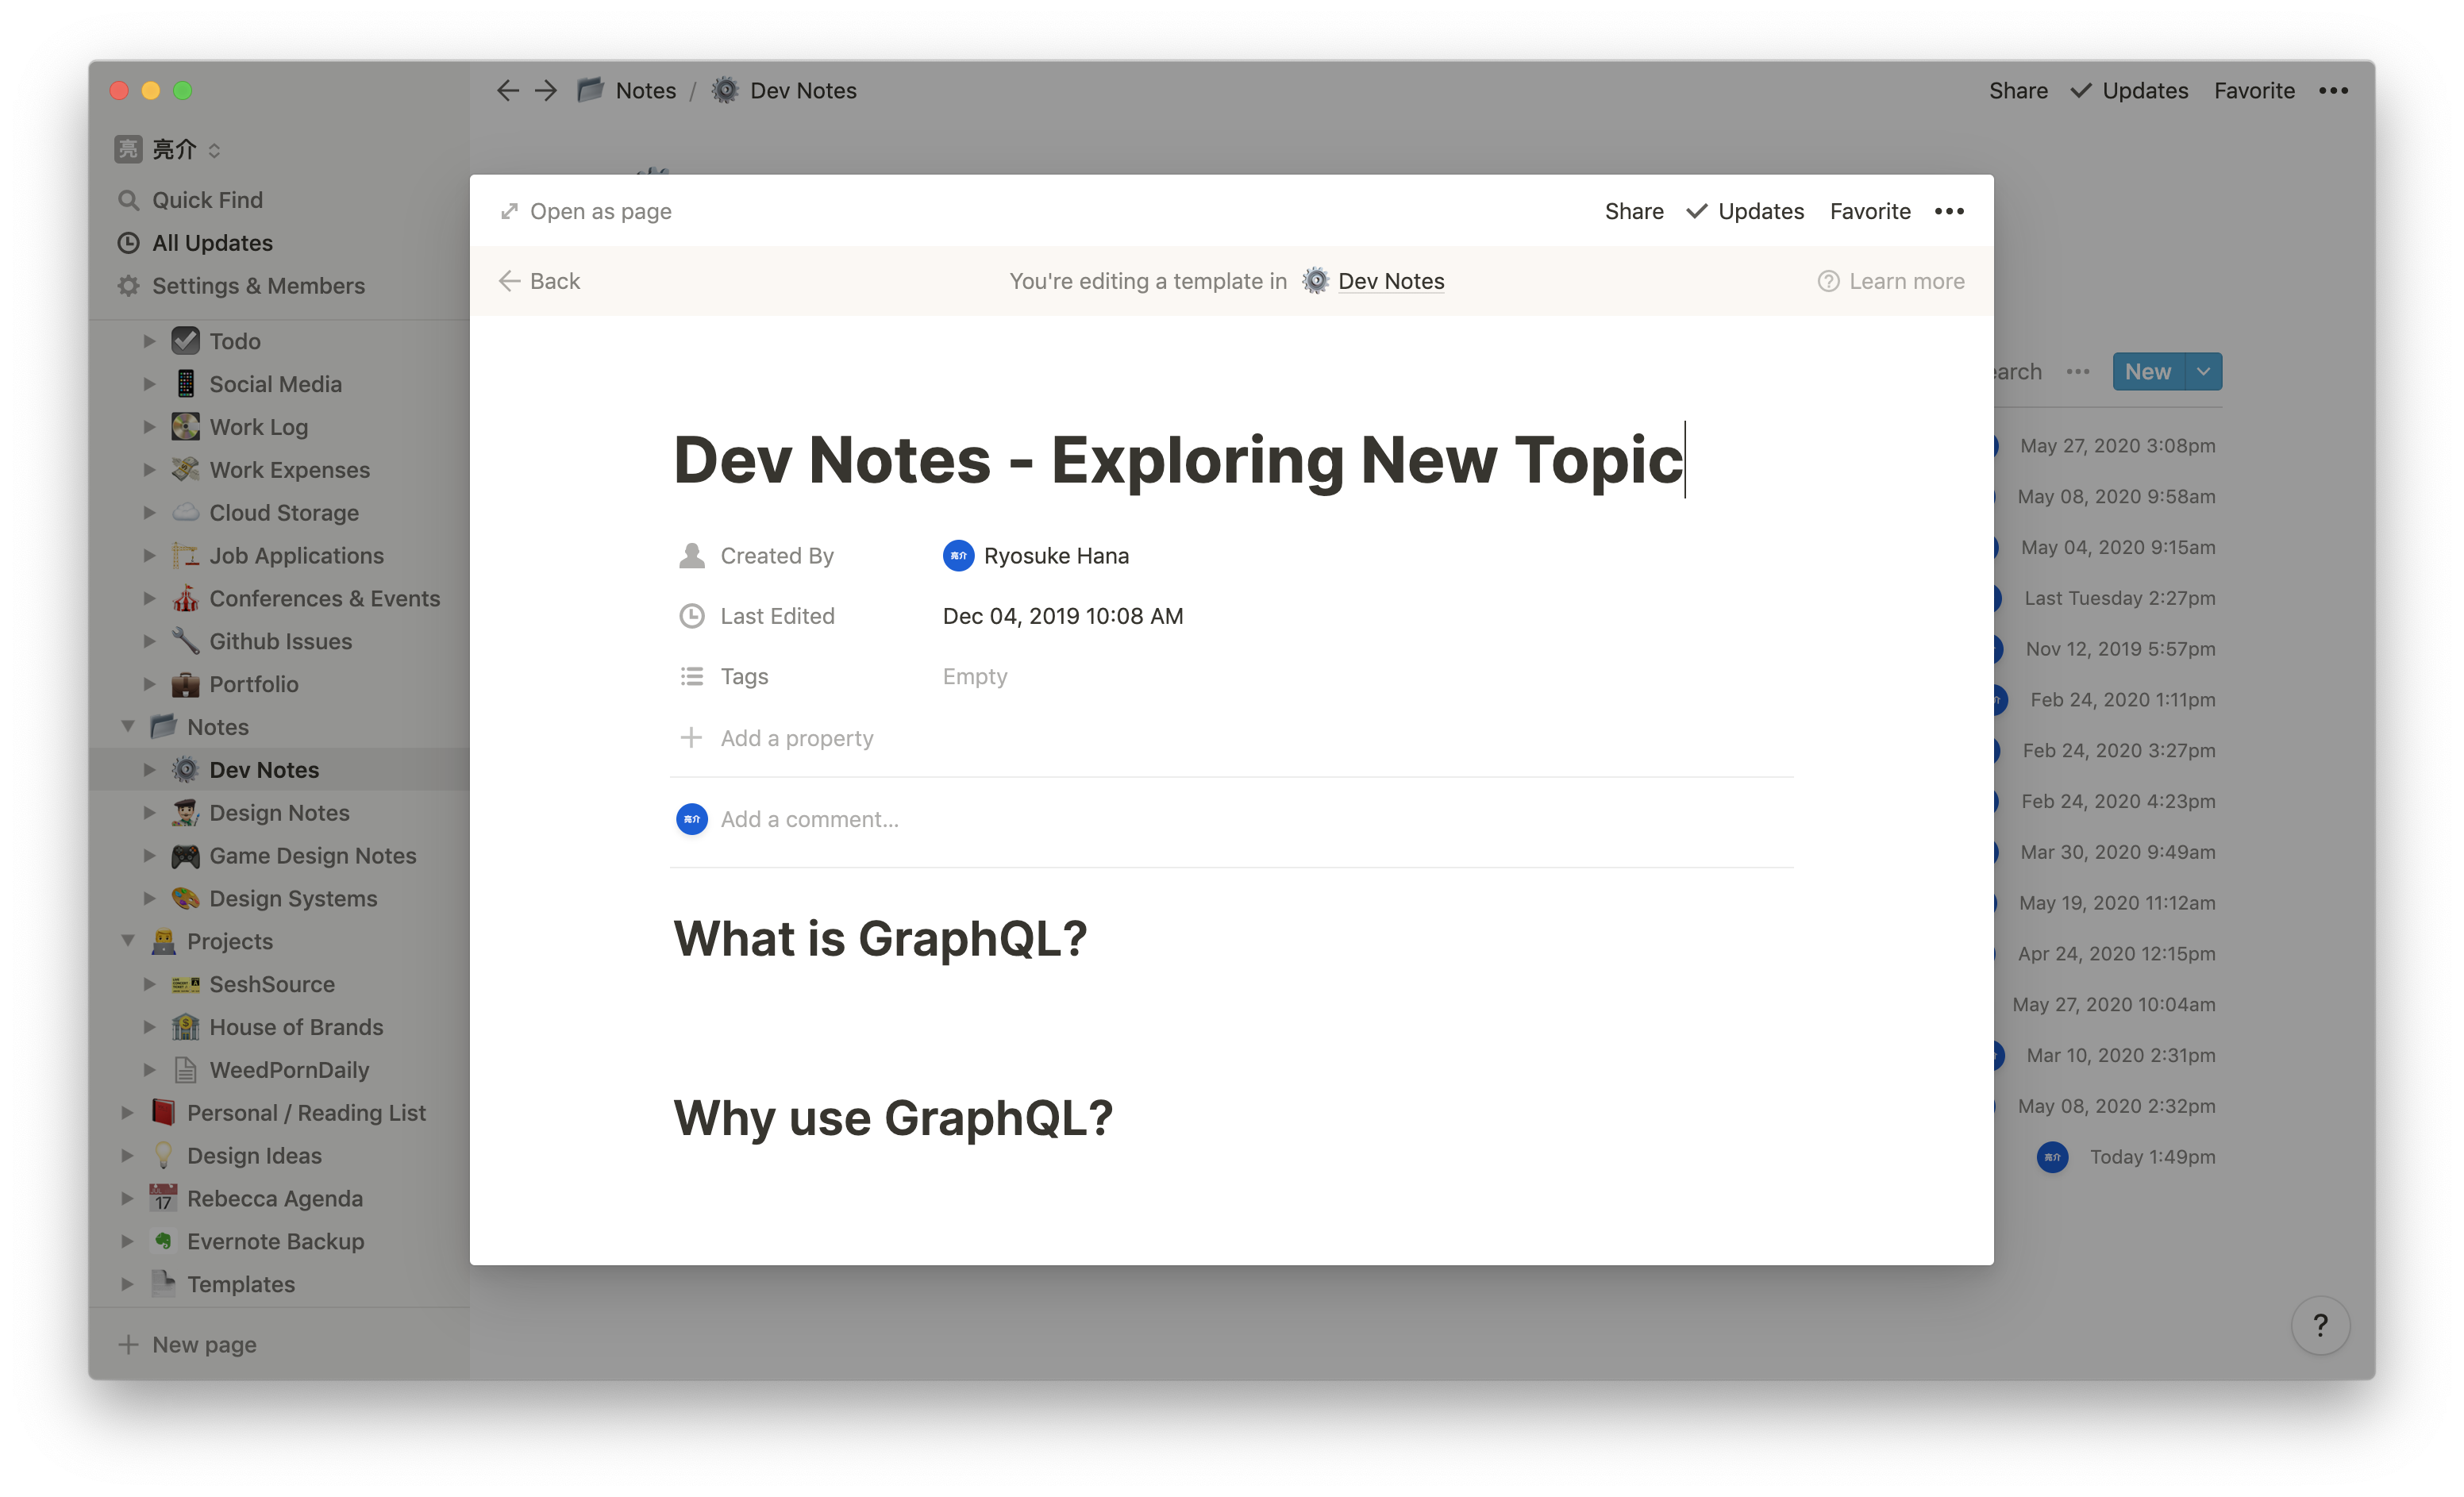 Screenshot of the Notion app on a template page used for creating new topic in the "Dev Notes" table